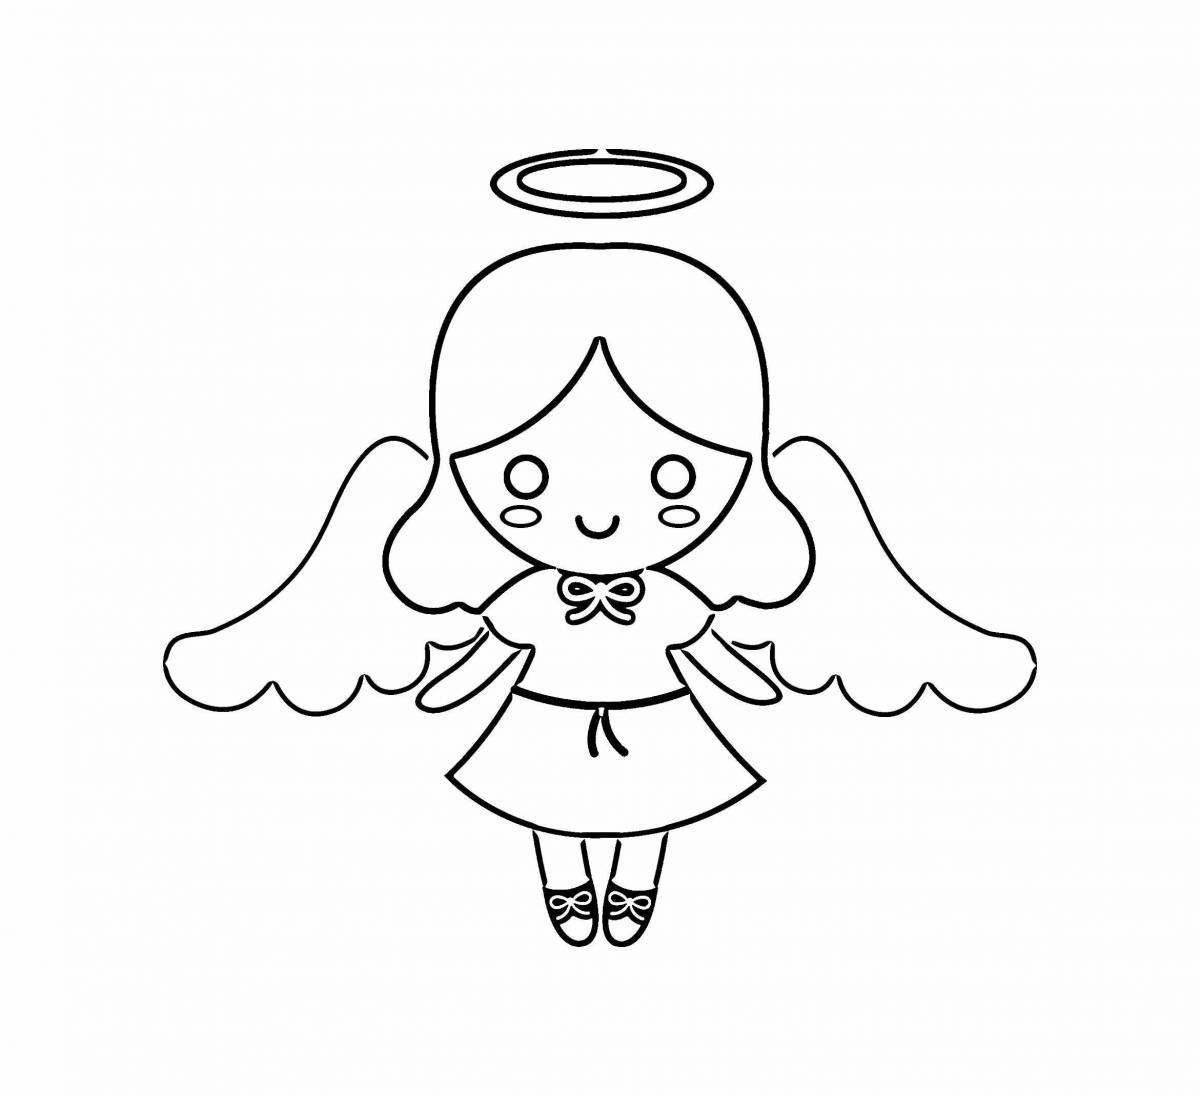 Coloring angel from heaven for kids